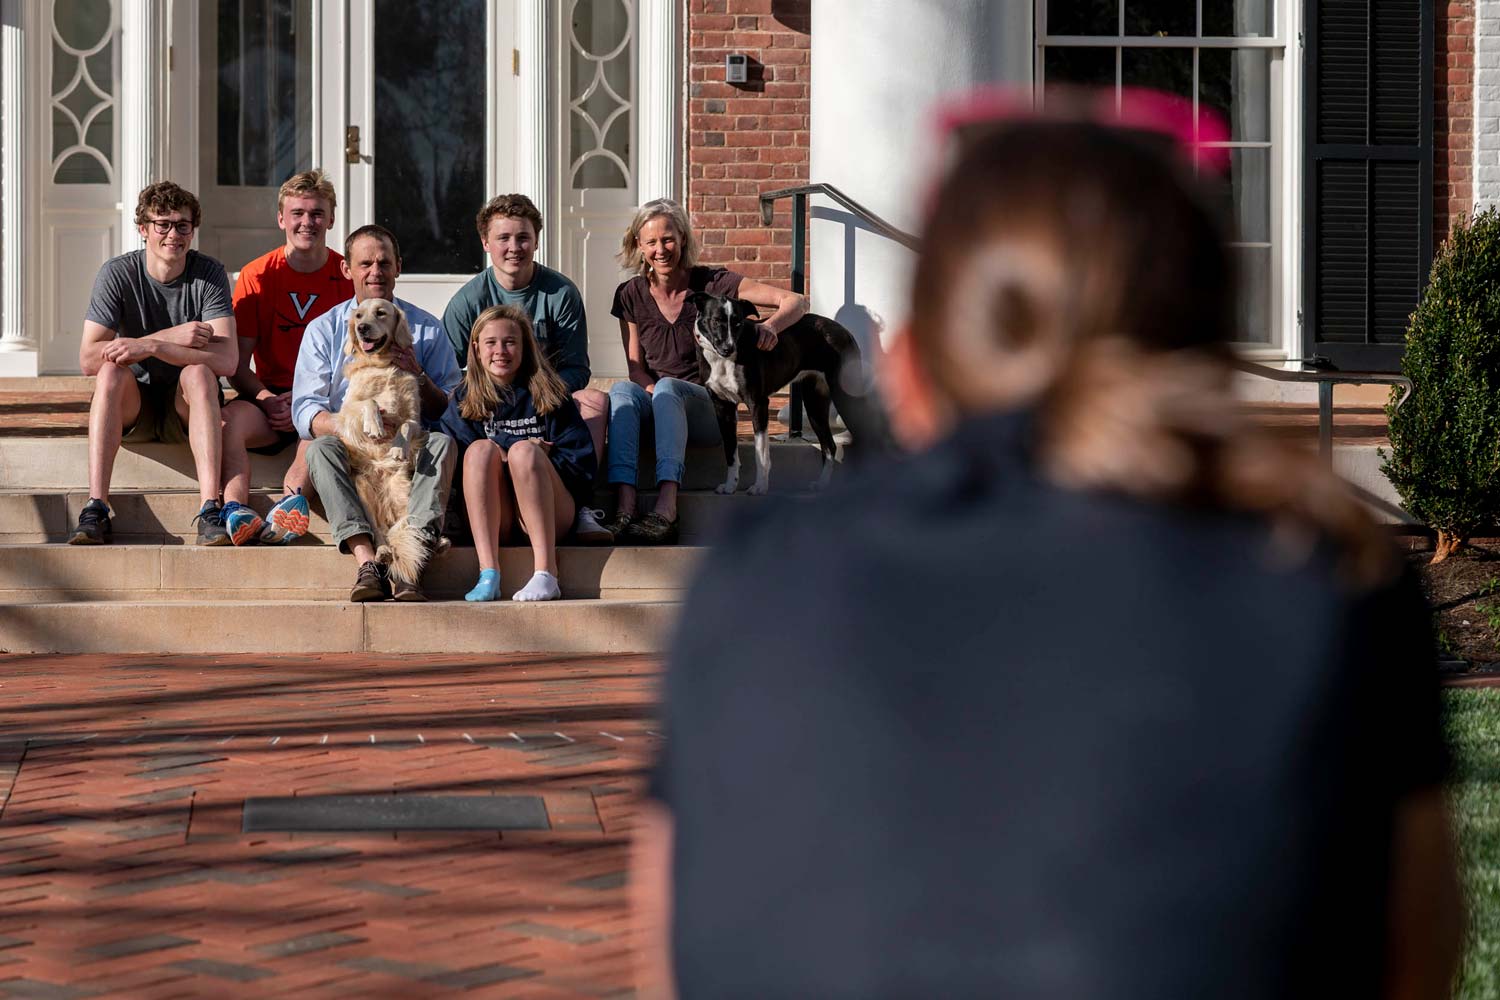 President Jim Ryan sits on the steps with his family and dogs as their picture is taken